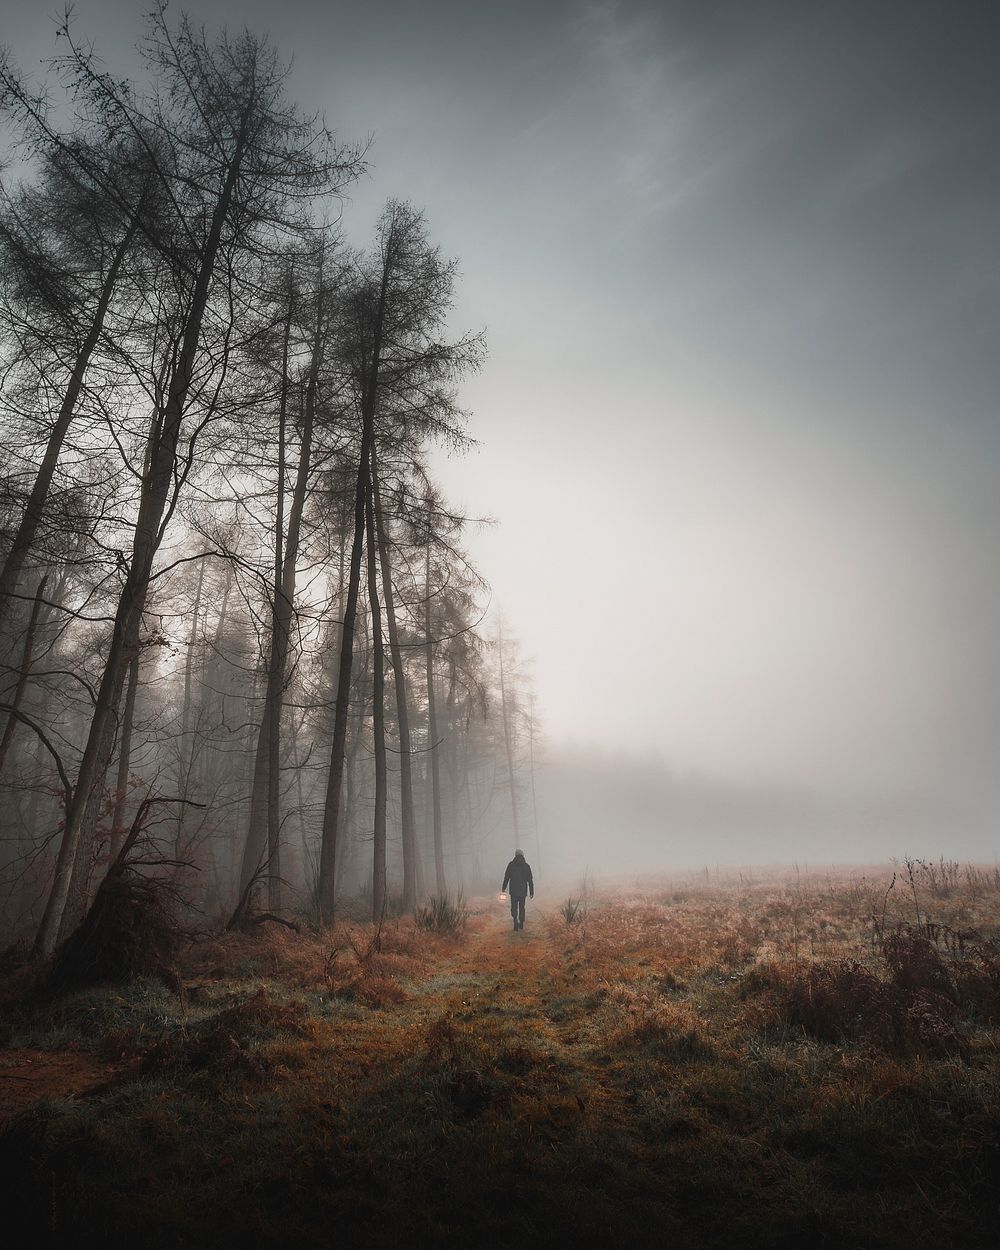 Man walking in the misty woods with a lamp